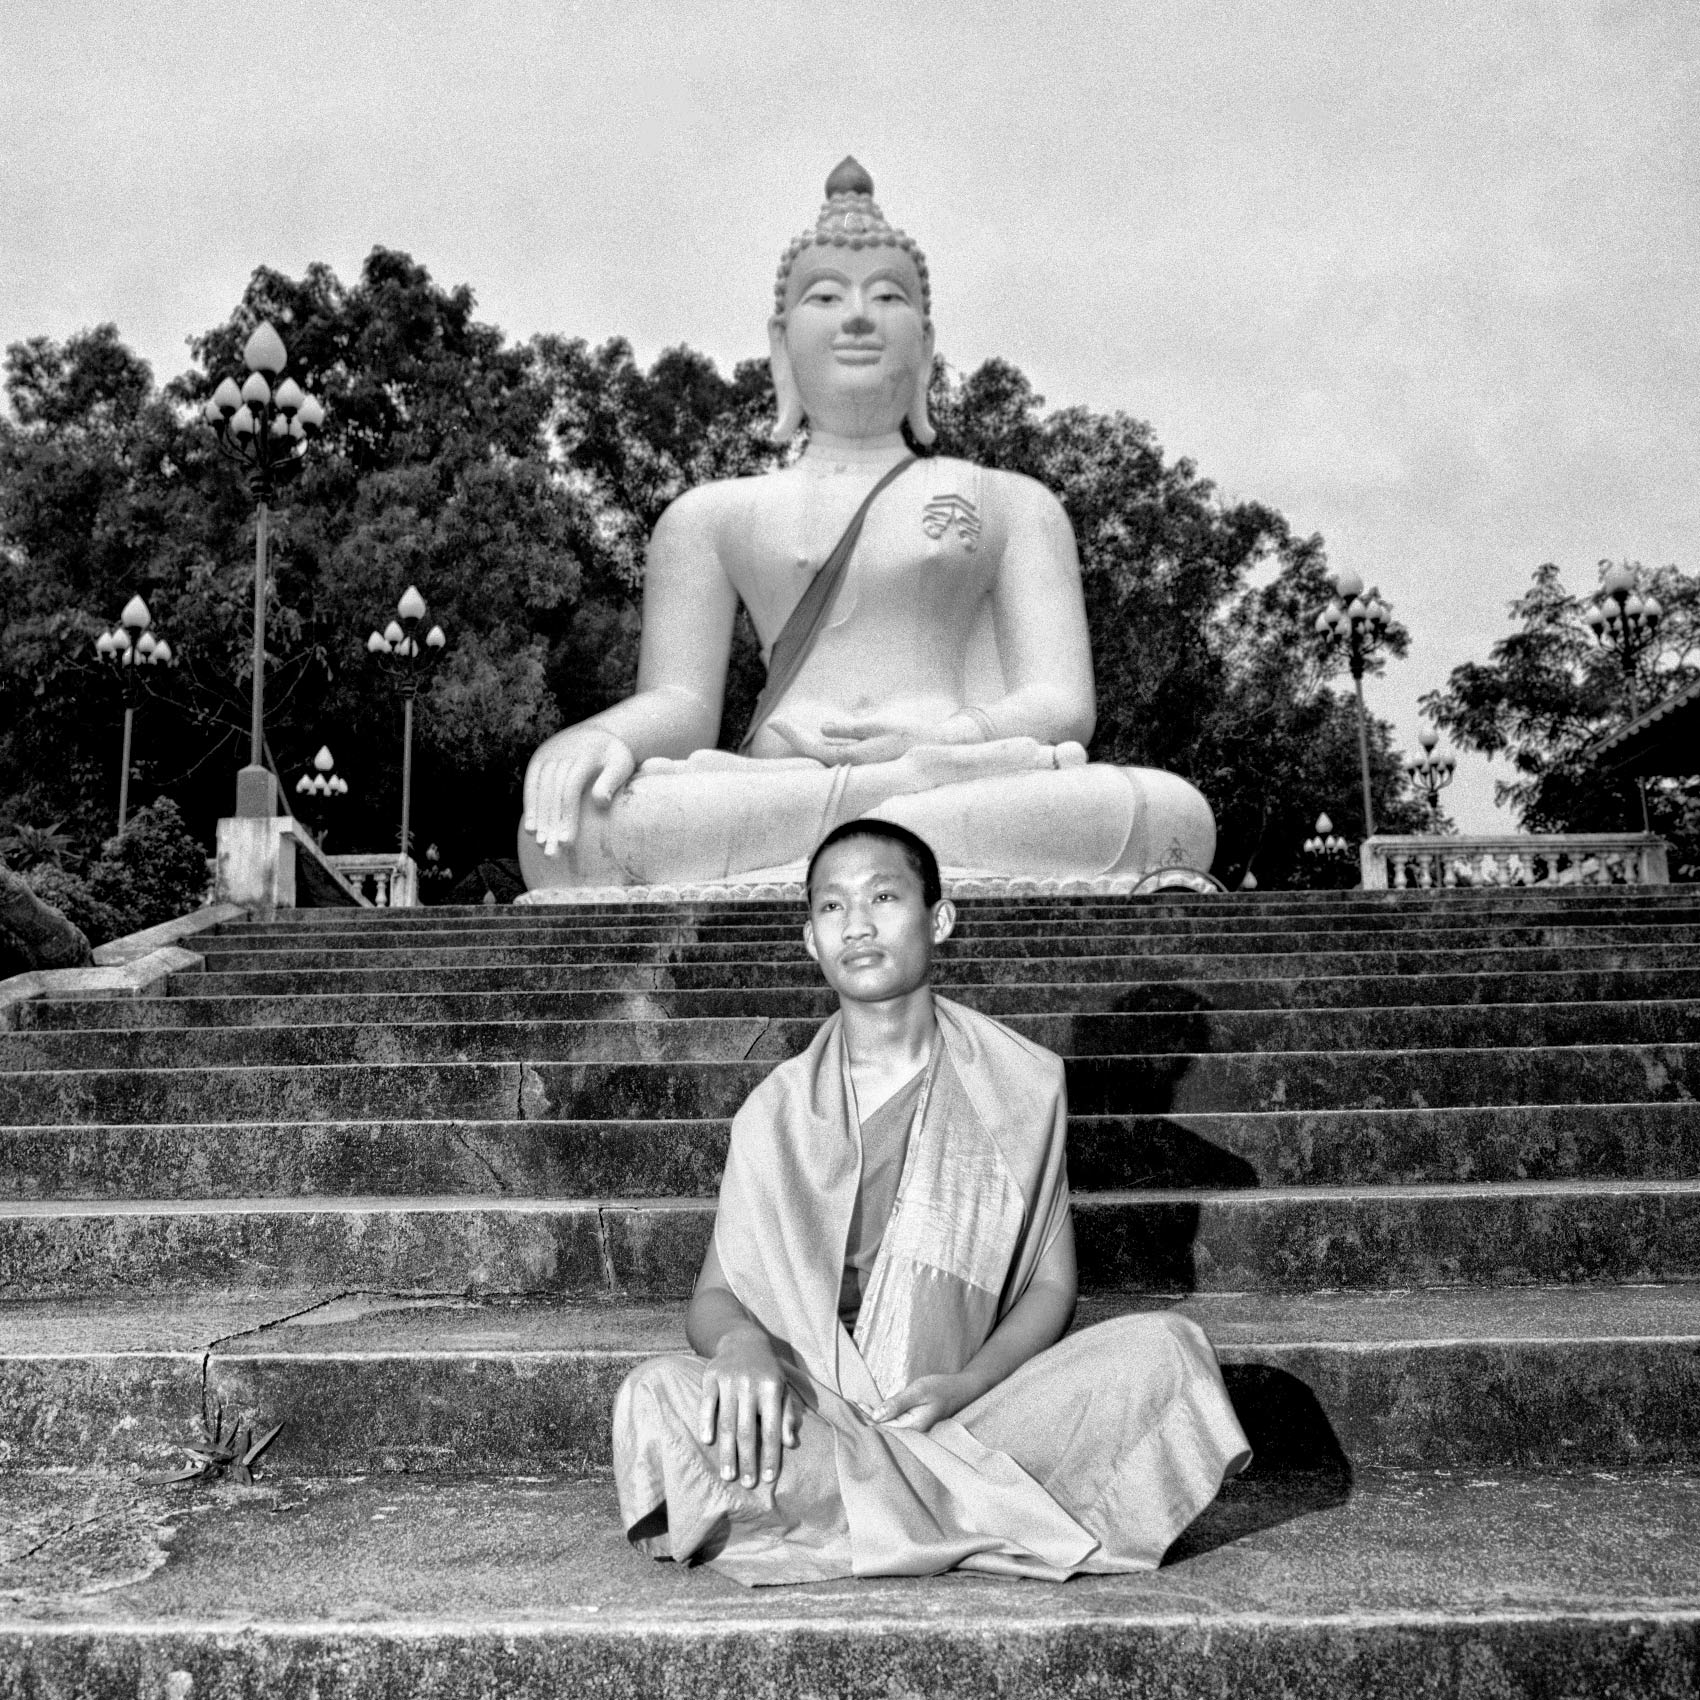 a-monk-copies-the-buddha-statue-behind-him-while-posing-for-a-photo-in-chang-rai-thailand